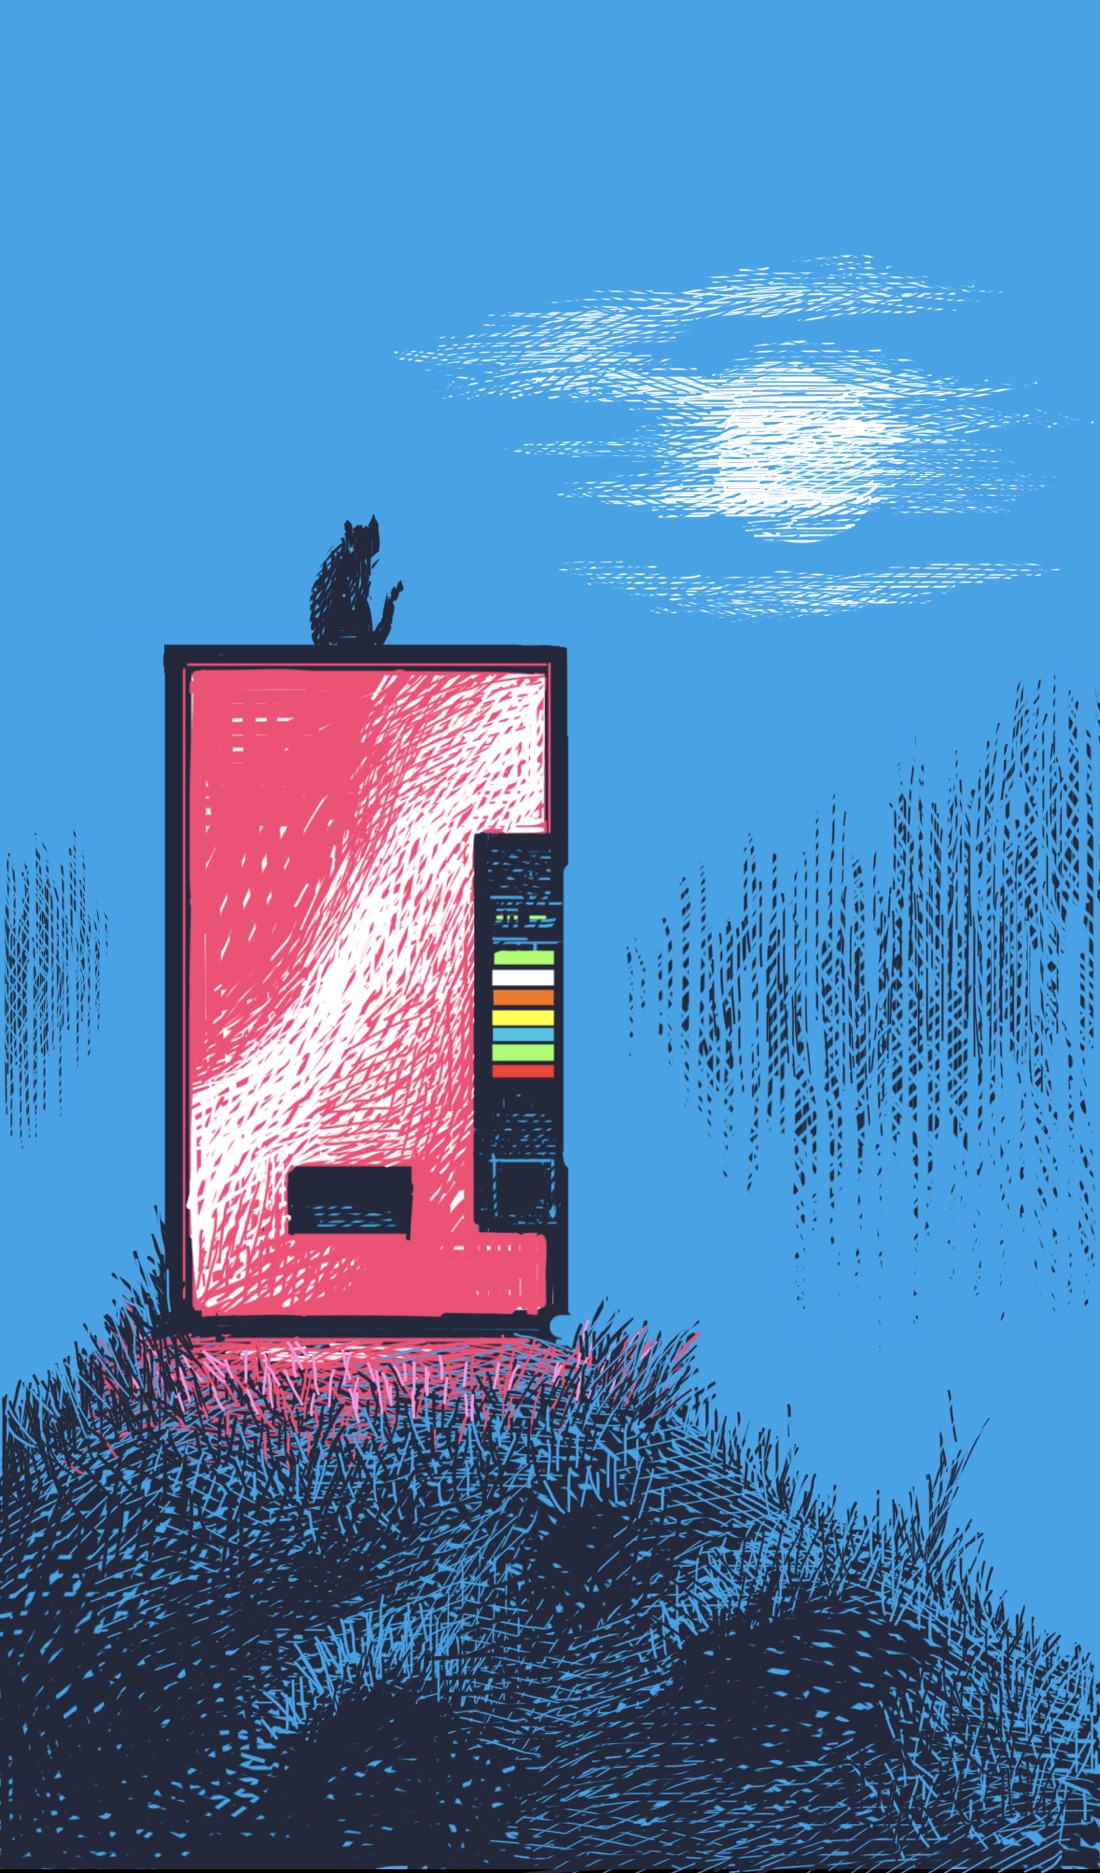 A small, grassy hill, far out in the middle of a forest. It's early evening on a damp, foggy night. The sky is a deep blue, not black. There is a full moon wrapped in fog, with a blurry tree line in the background. On top of the hill stands a pink, glowing vending machine (the soda kind, not the food kind). On top of the vending machine sits a cat.